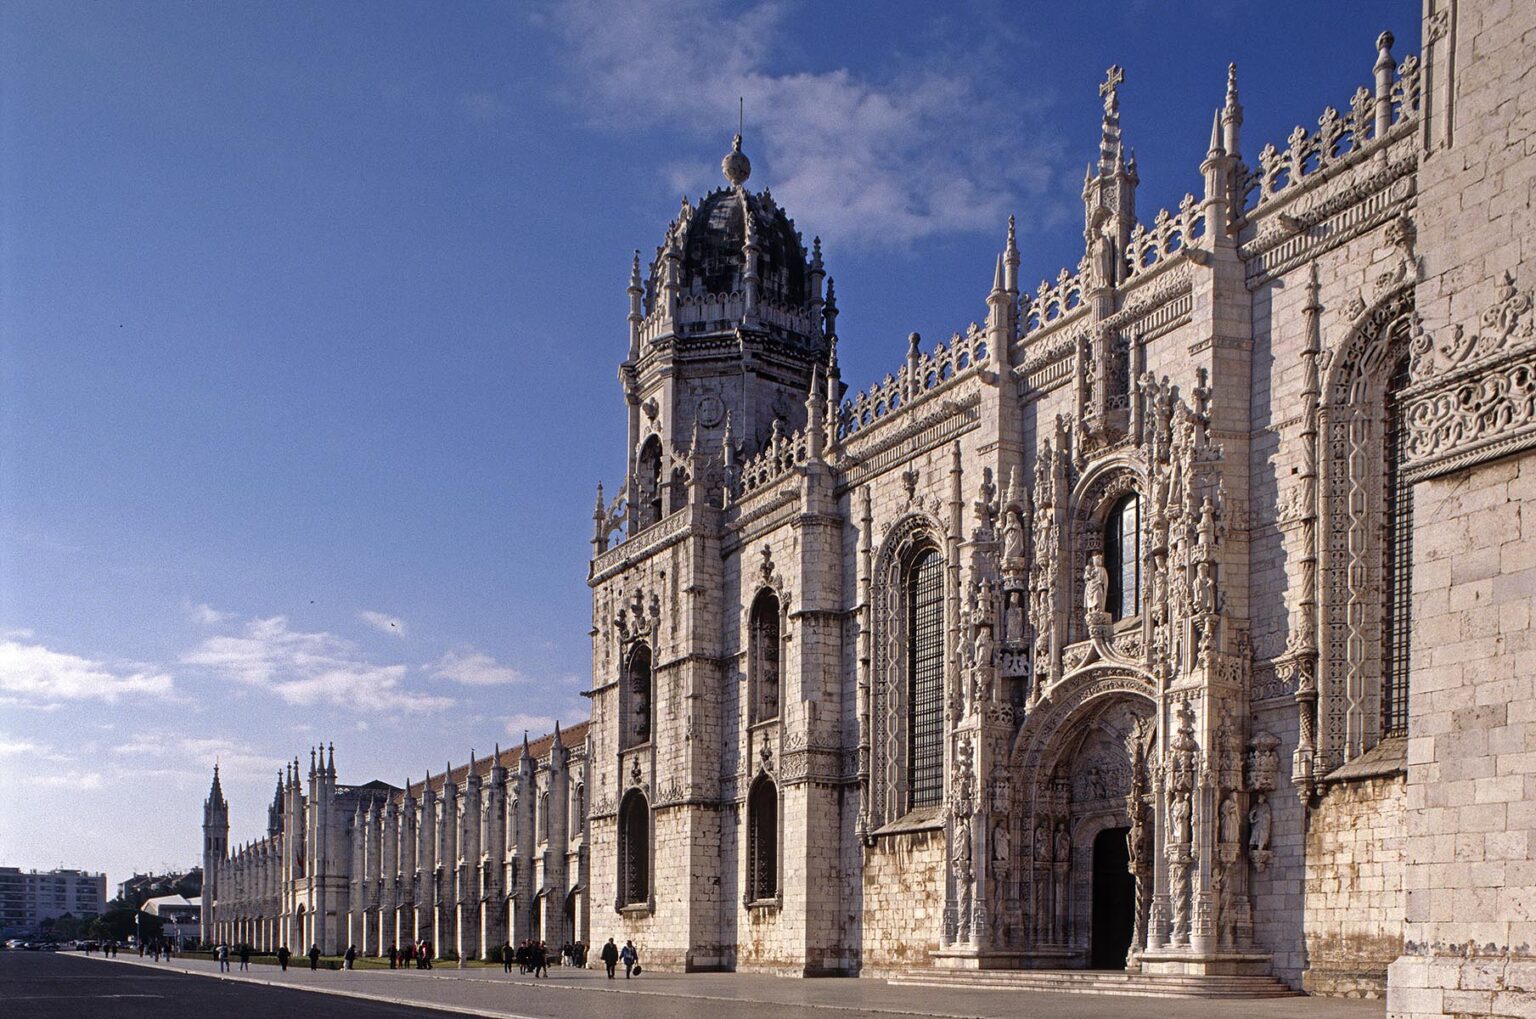 The gigantic CHURCH of the MONASTERY OF JERONIMOS in the BELEM DISTRICT - LISBON, PORTUGAL